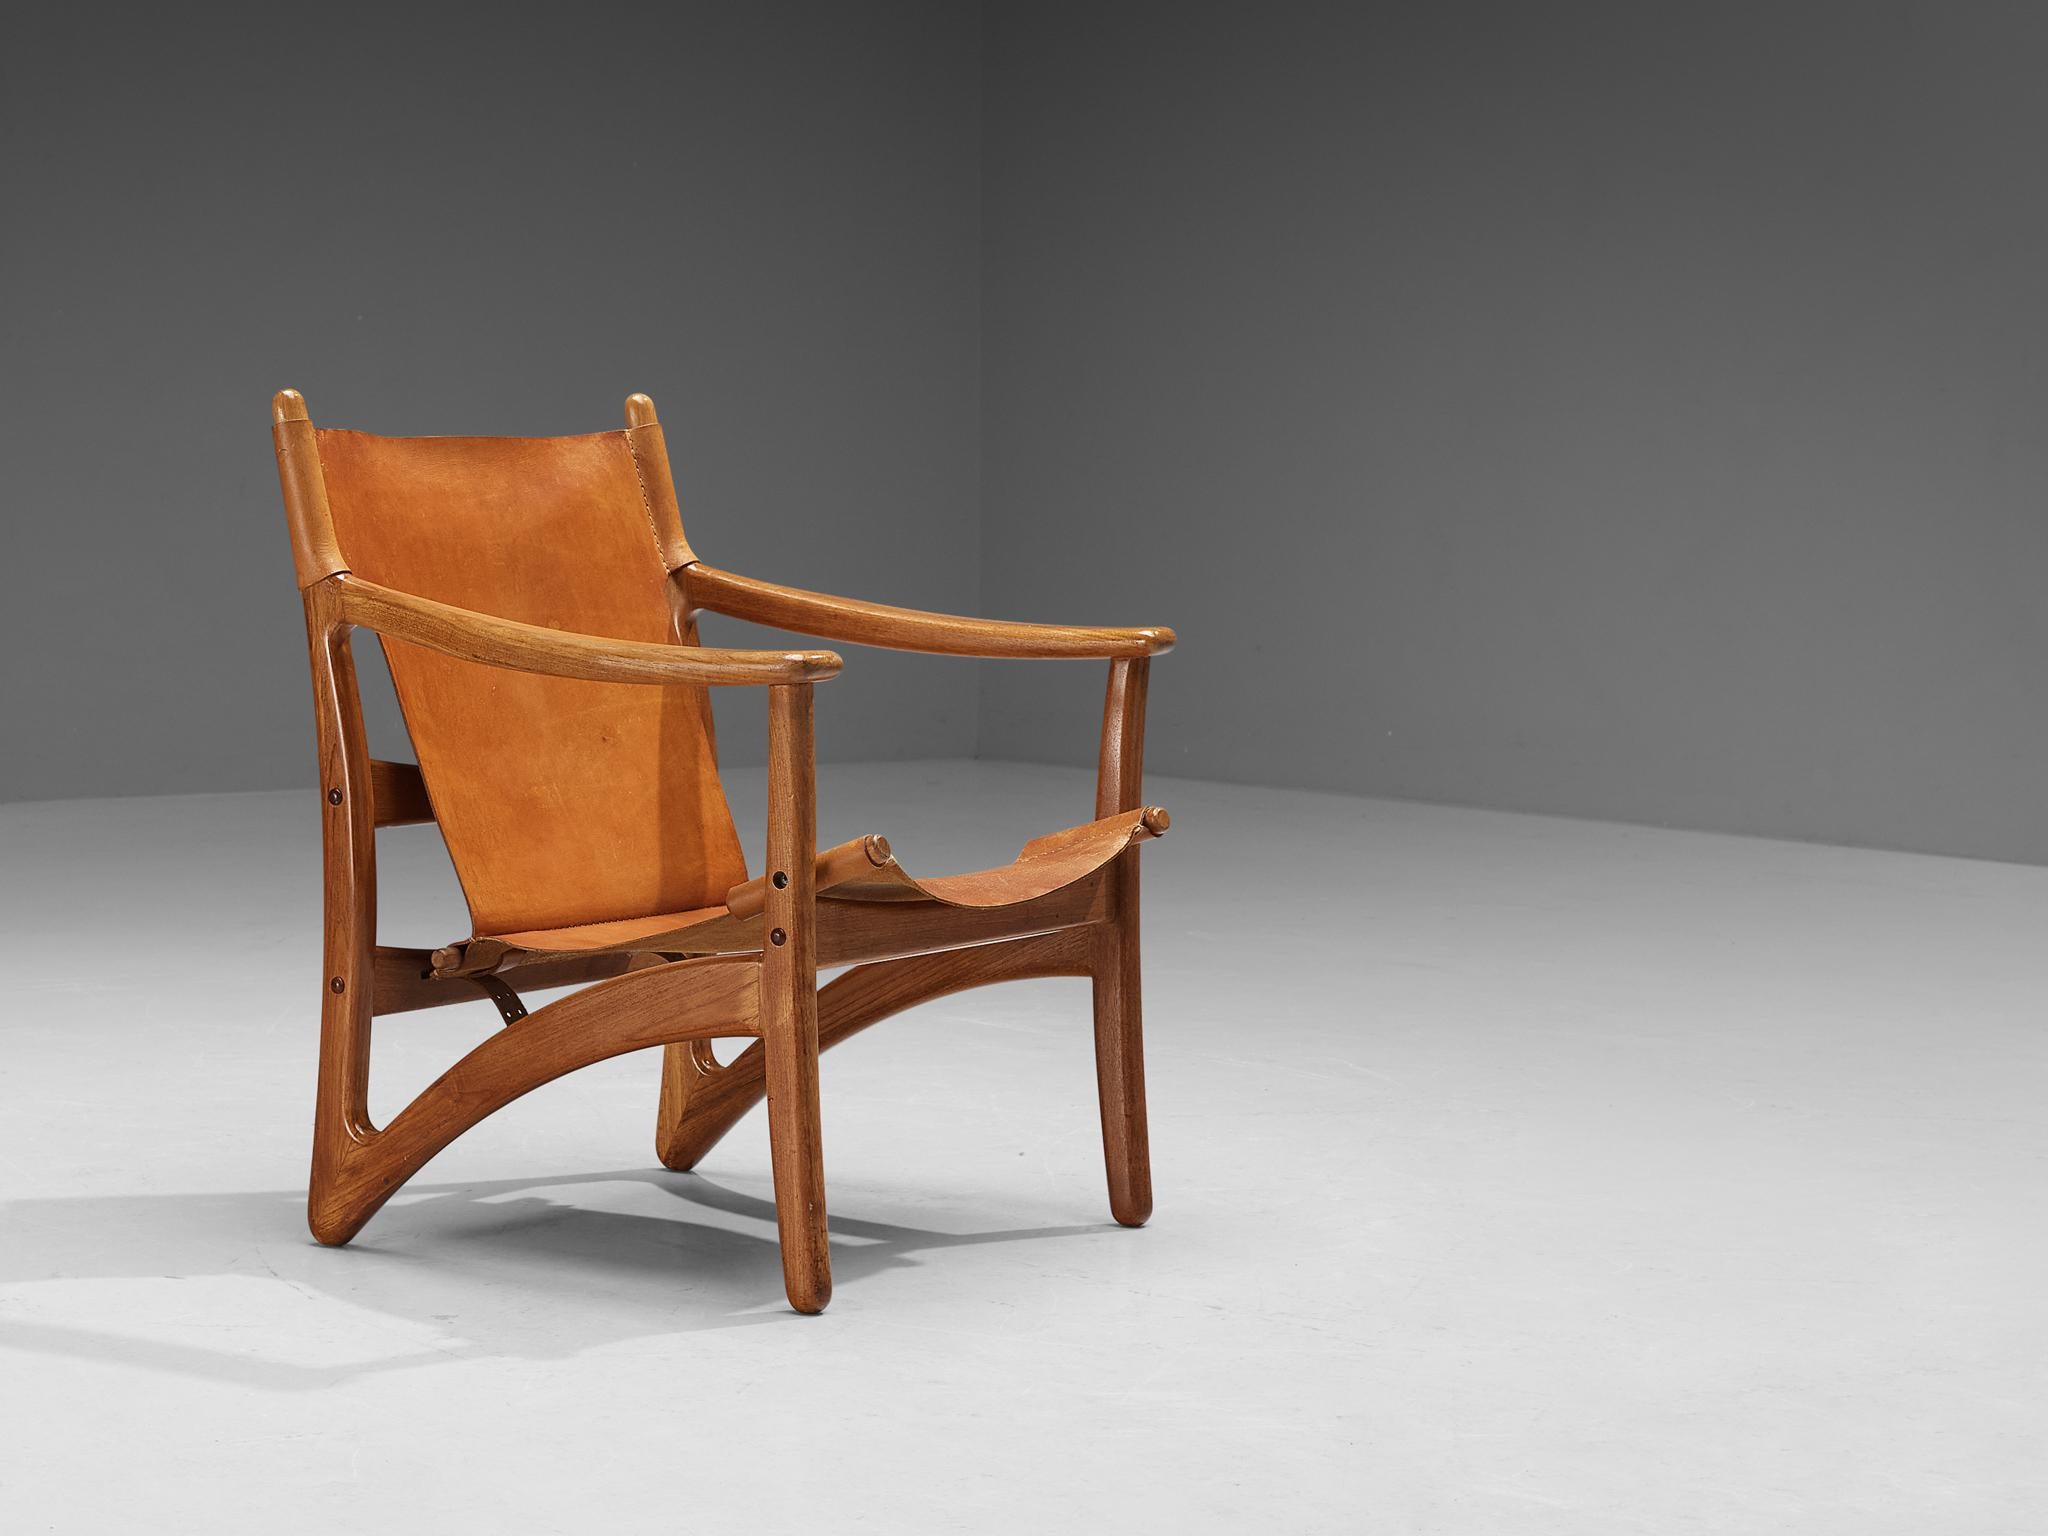 Attributed to Arne Vodder for Kircodan, lounge chair, teak, leather, Denmark, 1950s

This lounge chair of Danish origin is organically shaped. This is discernible in the teak frame based on curved lines and round edges. The softly bent armrests and